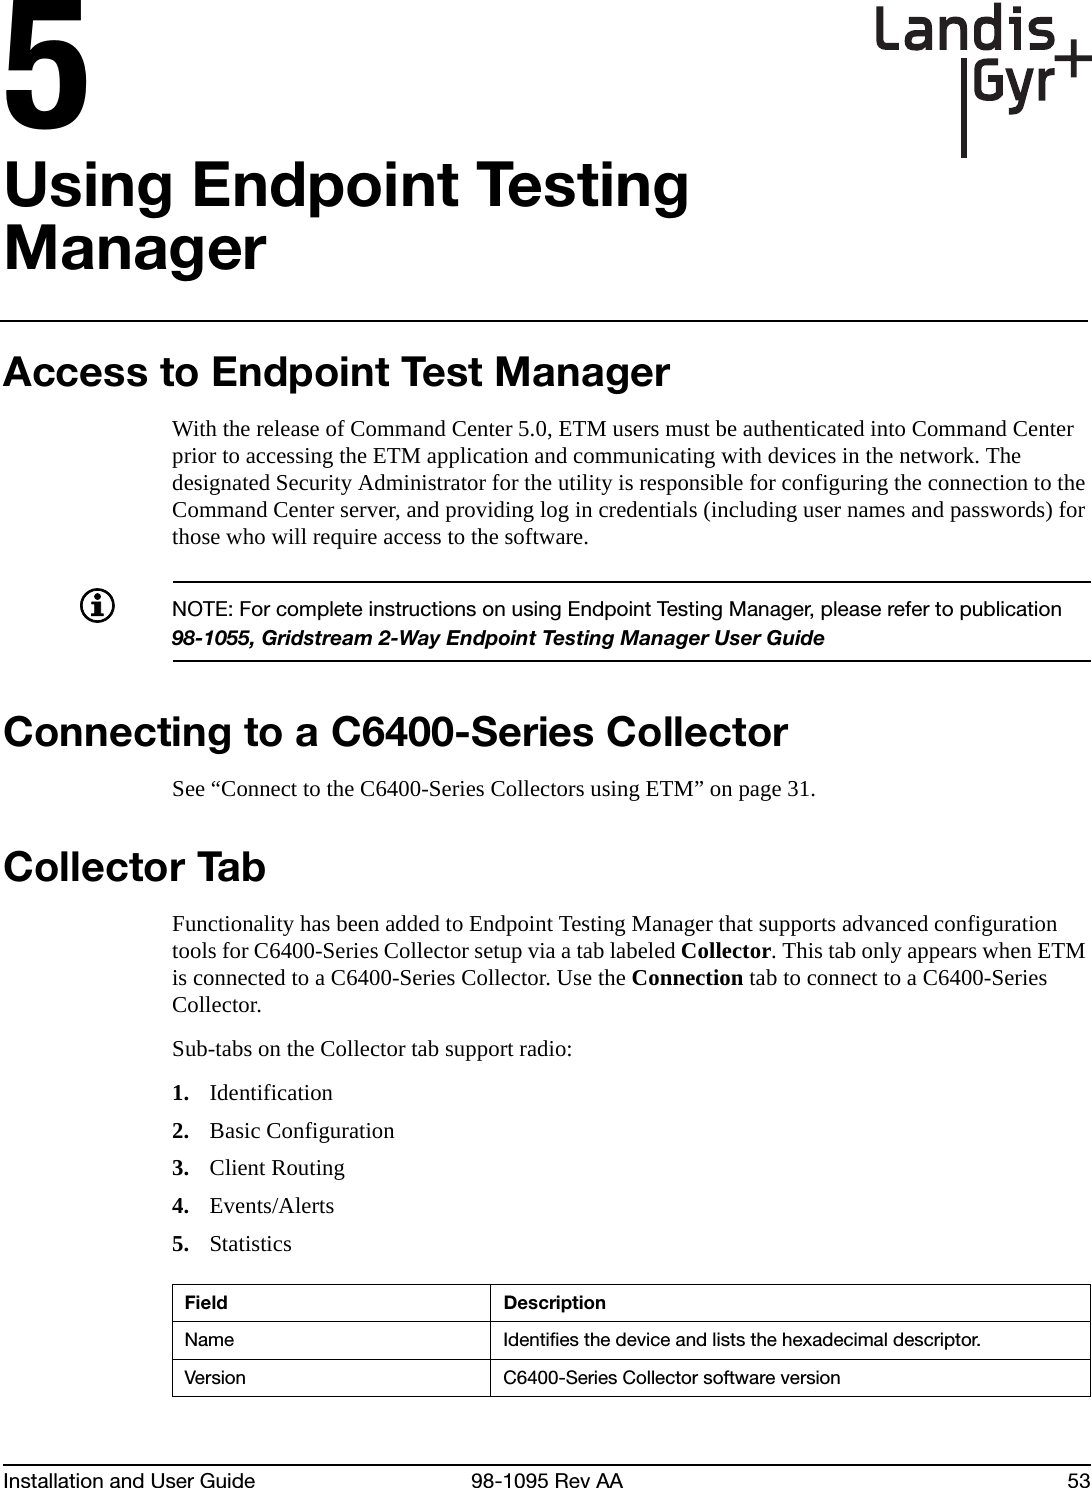 Installation and User Guide 98-1095 Rev AA 535Using Endpoint Testing ManagerAccess to Endpoint Test ManagerWith the release of Command Center 5.0, ETM users must be authenticated into Command Center prior to accessing the ETM application and communicating with devices in the network. The designated Security Administrator for the utility is responsible for configuring the connection to the Command Center server, and providing log in credentials (including user names and passwords) for those who will require access to the software.NOTE: For complete instructions on using Endpoint Testing Manager, please refer to publication 98-1055, Gridstream 2-Way Endpoint Testing Manager User GuideConnecting to a C6400-Series CollectorSee “Connect to the C6400-Series Collectors using ETM” on page 31.Collector TabFunctionality has been added to Endpoint Testing Manager that supports advanced configuration tools for C6400-Series Collector setup via a tab labeled Collector. This tab only appears when ETM is connected to a C6400-Series Collector. Use the Connection tab to connect to a C6400-Series Collector.Sub-tabs on the Collector tab support radio:1. Identification2. Basic Configuration3. Client Routing4. Events/Alerts5. StatisticsField DescriptionName Identifies the device and lists the hexadecimal descriptor.Version C6400-Series Collector software version